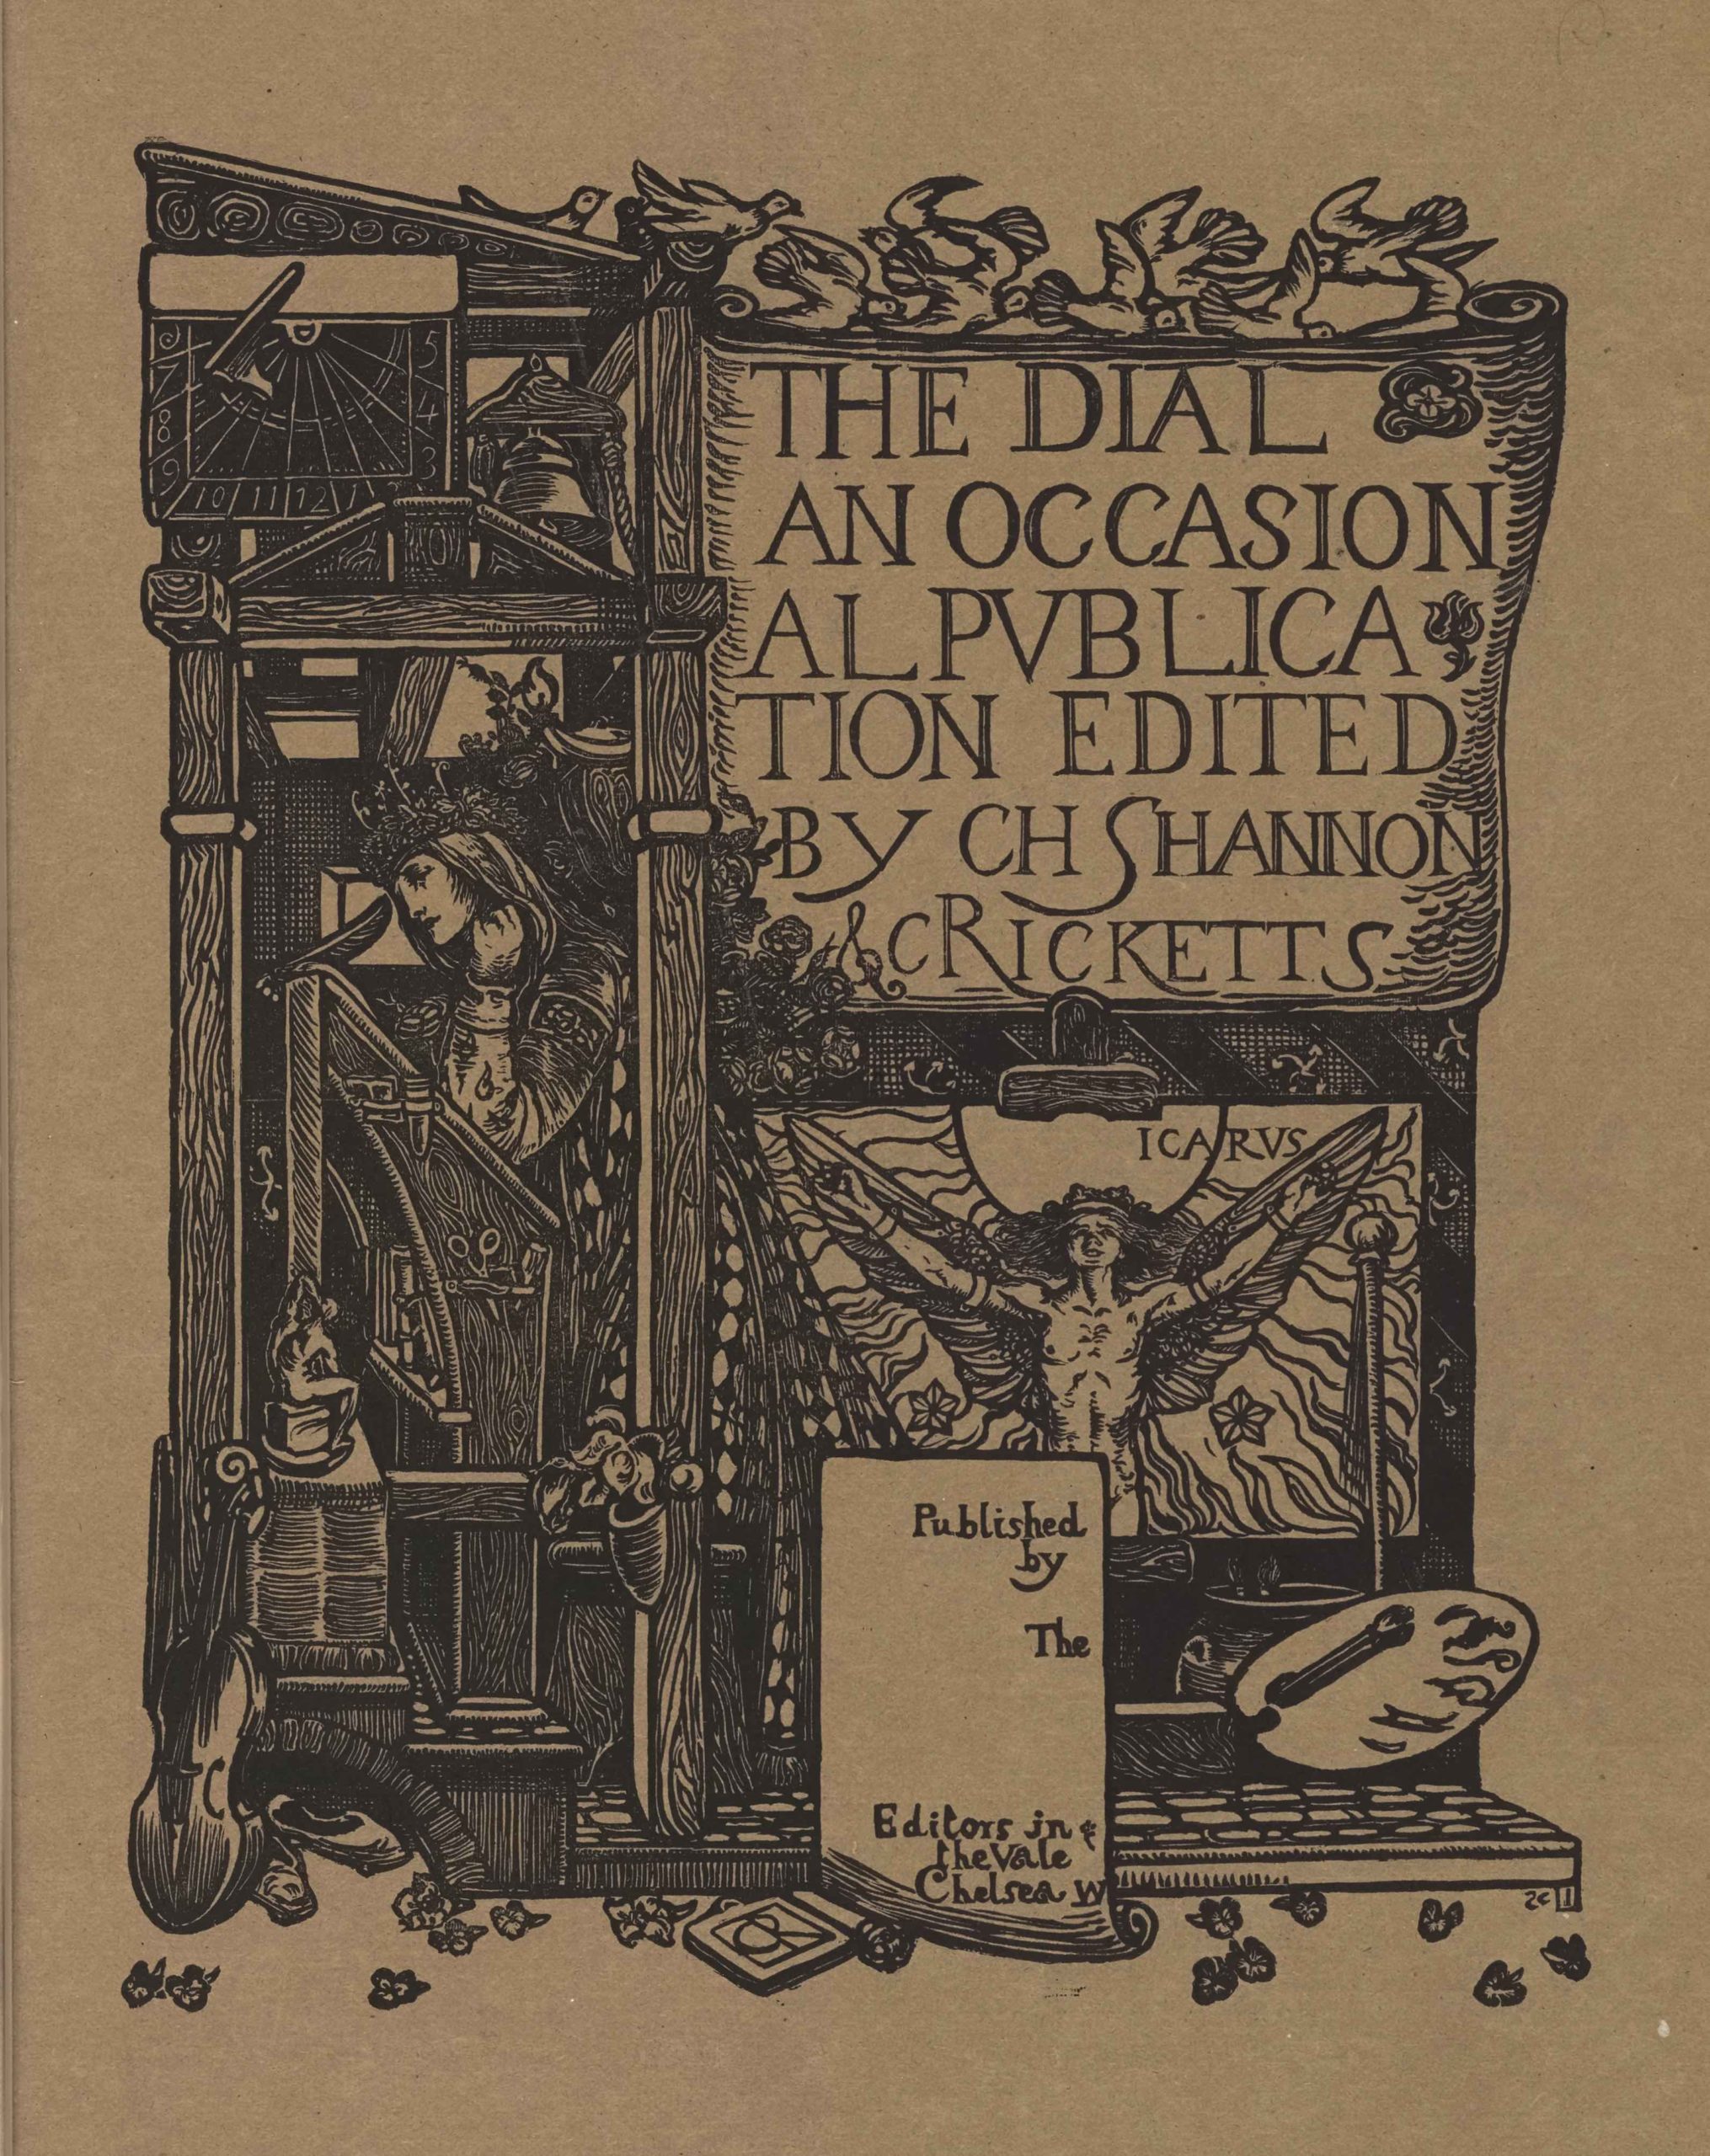 The image is printed in black ink on buff coloured paper. It is centered in portrait orientation on the page. In the upper right region of the image, a large scroll or cartouche displaying the text “The Dial: An Occasional Publication Edited by CH Shannon & C Ricketts” in large capital letters is positioned on a tall structure made from wooden cross beams. Ten white doves appear to be flying above in both directions to land on the top beam of the structure. Below the large scroll is a sheaf of roses and a labelled image of Icarus, naked , with his arms outstretched beside him to hold up his wings. Icarus is standing in front of the sun and is surrounded by flames and various scattered flowers. A framed box is below the Icarus iconography displaying the publishing information: “Published by the Editors in The Vale Chelsea W.” The artitst’s initials “CR” appear centered below the box, set within a book. To the right of this box is an artist’s palette with one brush and a jar with two sprouting plants. In the upper left portion of the image, a sundial and a bell are displayed underneath the lectern-style roof of the structure on the left side, adjacent with the first two lines of text on the scroll. Below them is an open room built in the confines of the wooden cross beams. A woman with a crowned headpiece, long hair, and an ornamented robe, is standing in left profile in the open room. She appears to be leaning against a tall writing desk/prayer stand/ art desk, which is also depicted in profile. The woman’s left arm is bent and rested on the desk and raised beneath her chin. Her right arm is rested up against the desk and she appears to be holding a quill pen with her right hand. The side of the desk contains artisanal instruments such as scissors and engravers. A small grotesque supports one of the legs of the desk at left. Below this pedestal is leaning a violin and a pair of slippers. Scattered across the whole bottom border of the image are leaves or flower petals.